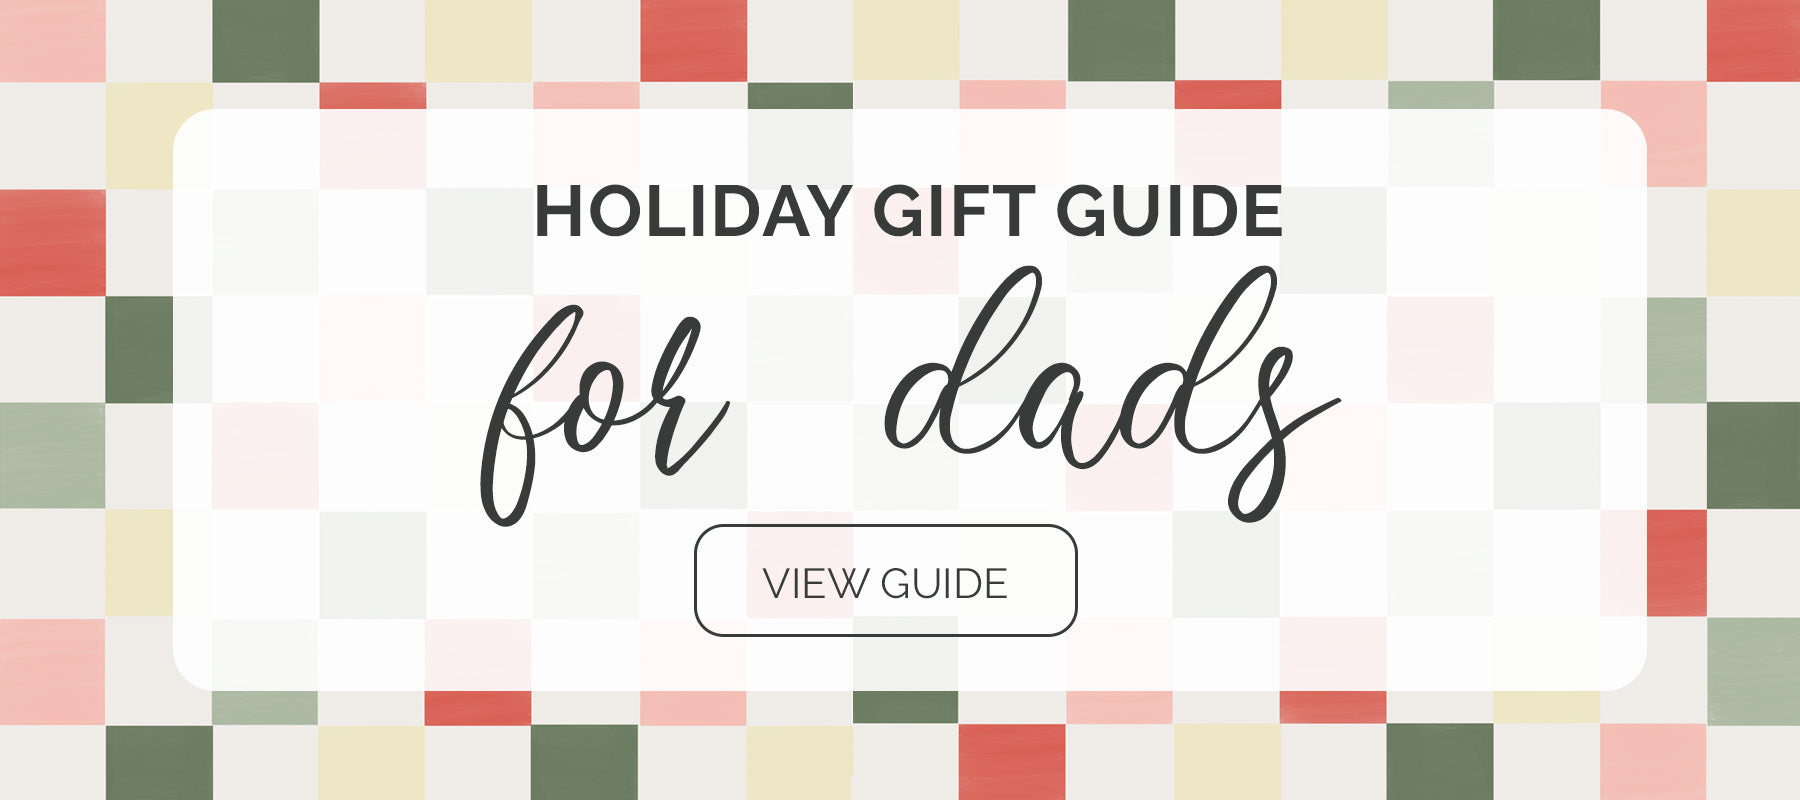 Parker Baby Co. Holiday Gift Guide for Dads